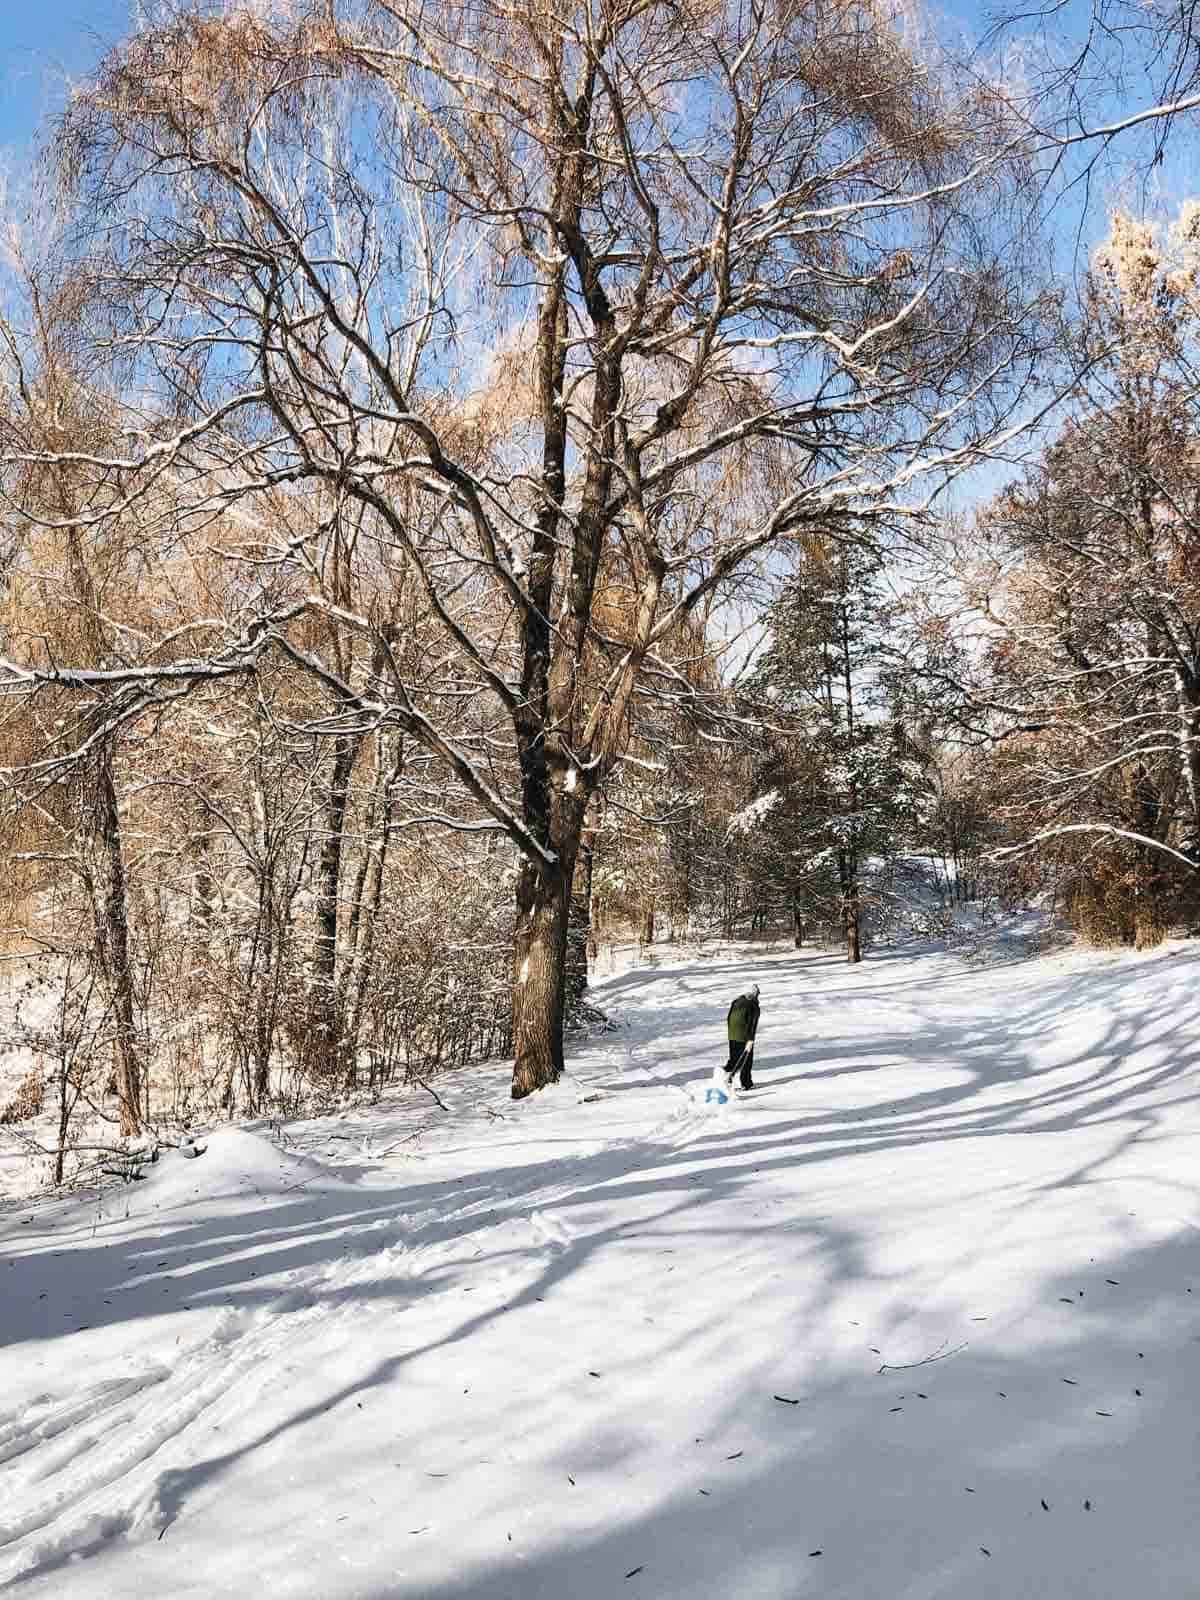 Land and trees covered with snow and a man wearing black walking in the middle with his dog.